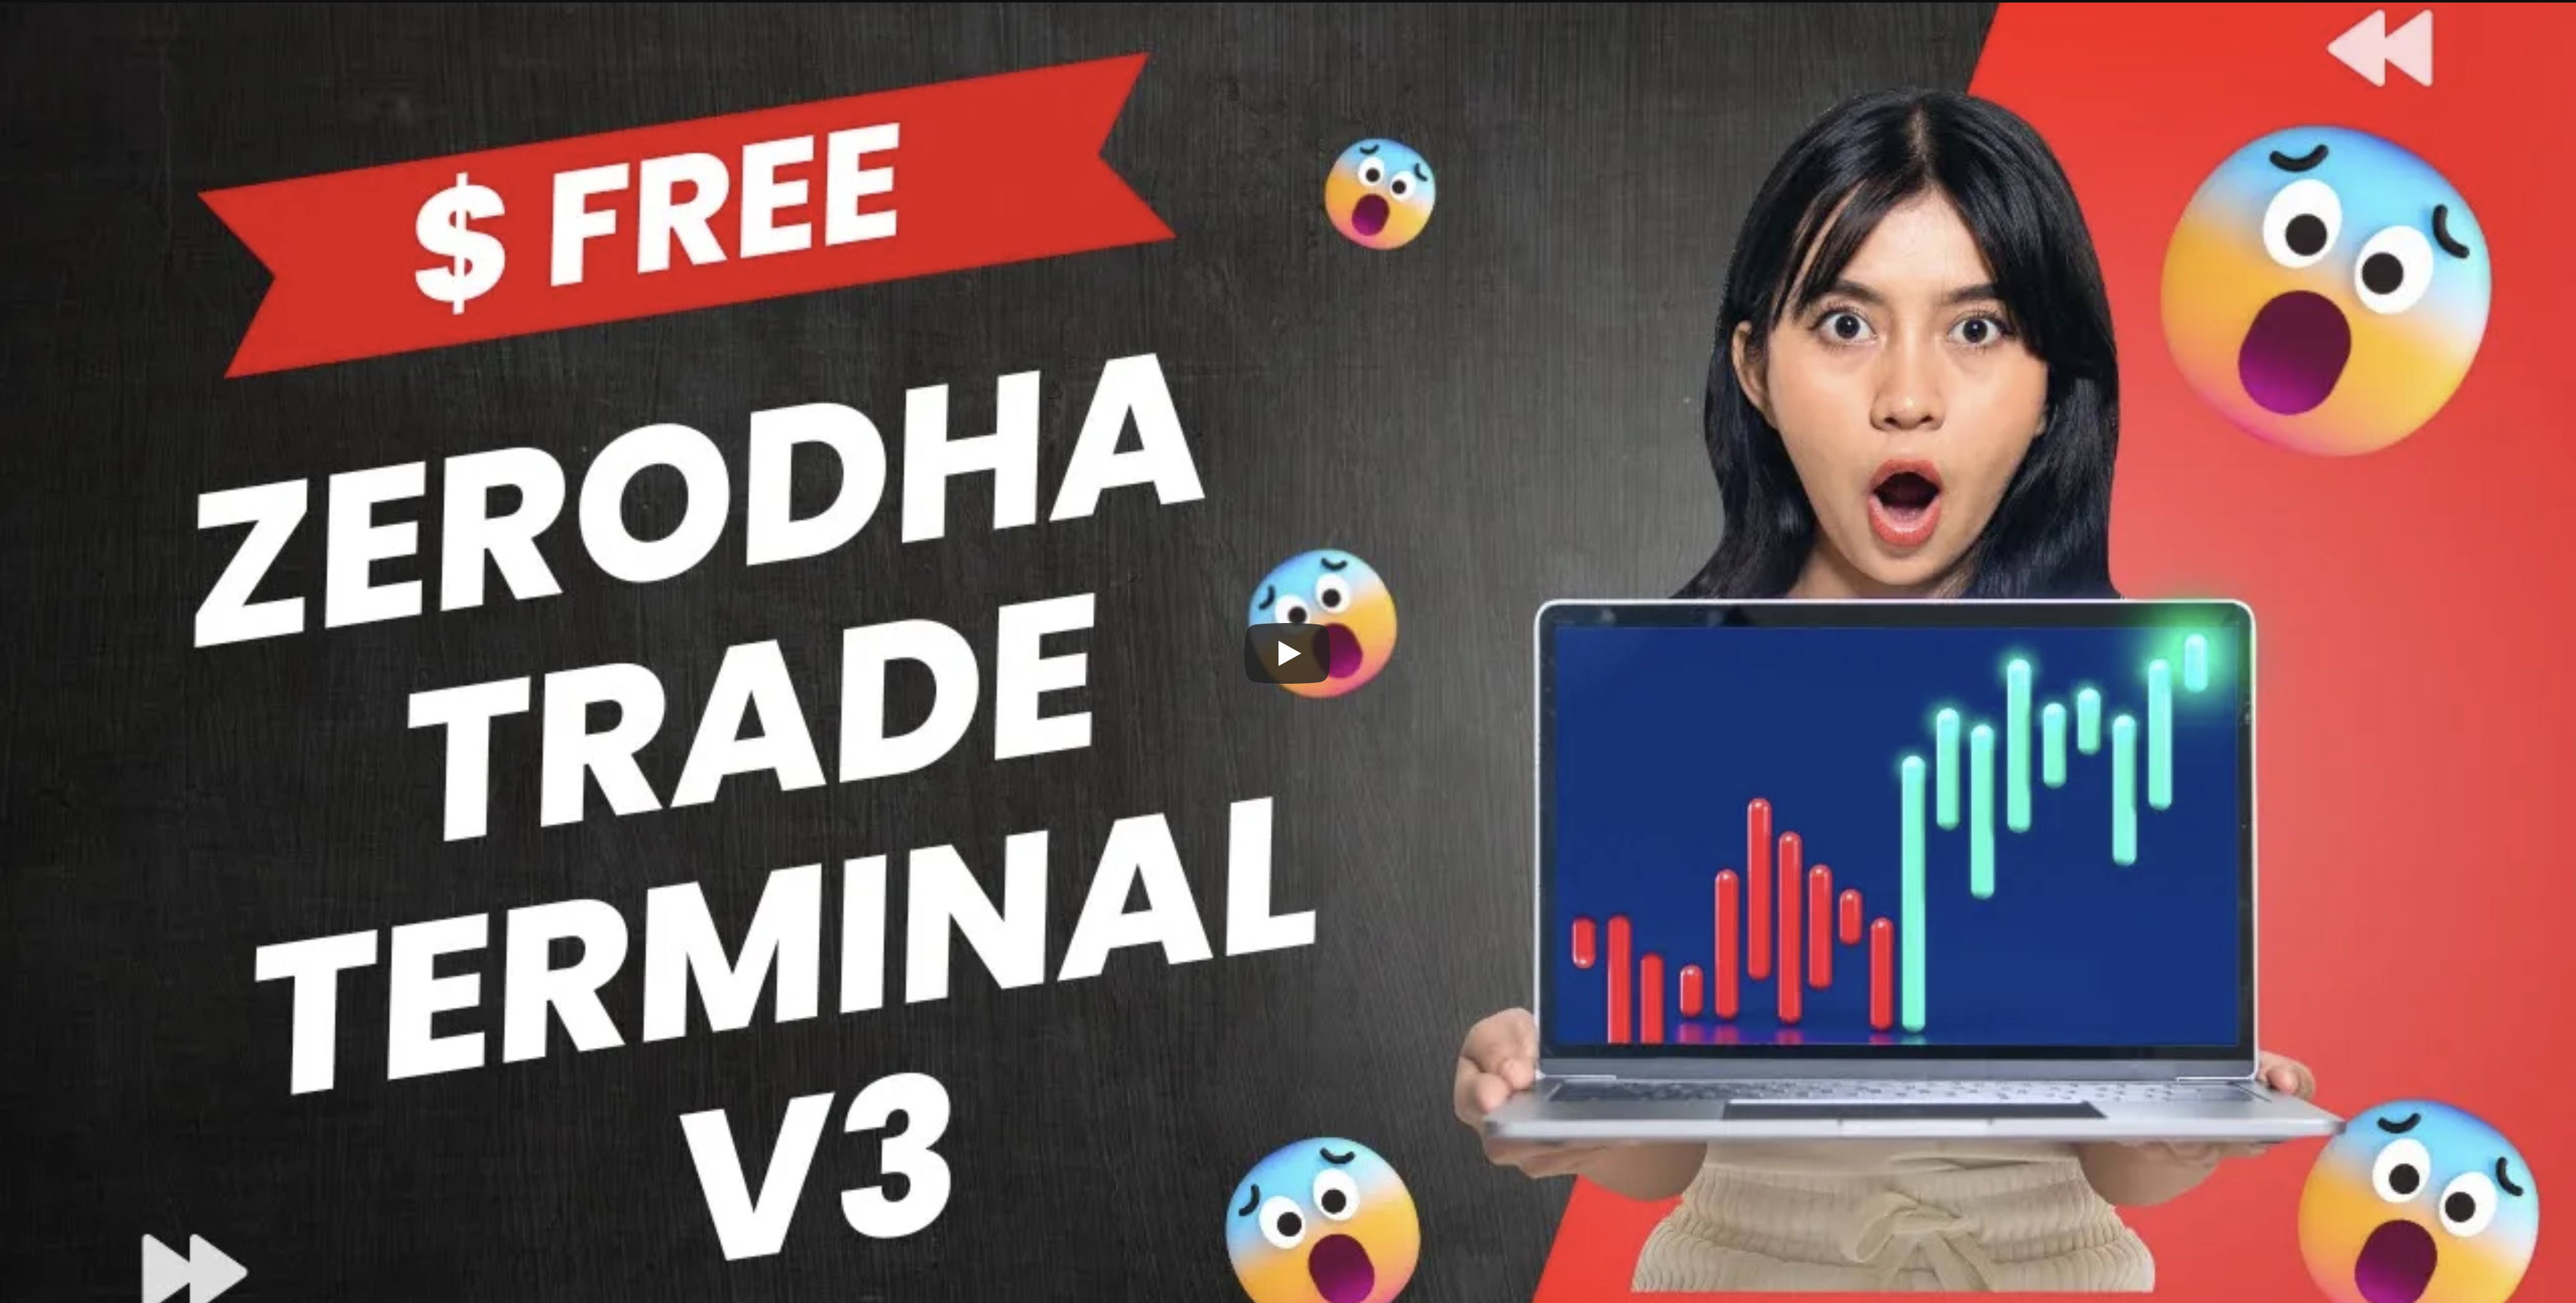 Watch The Youtube Video For More Details On How To Install & Use Zerodha Excel Trade Terminal V3